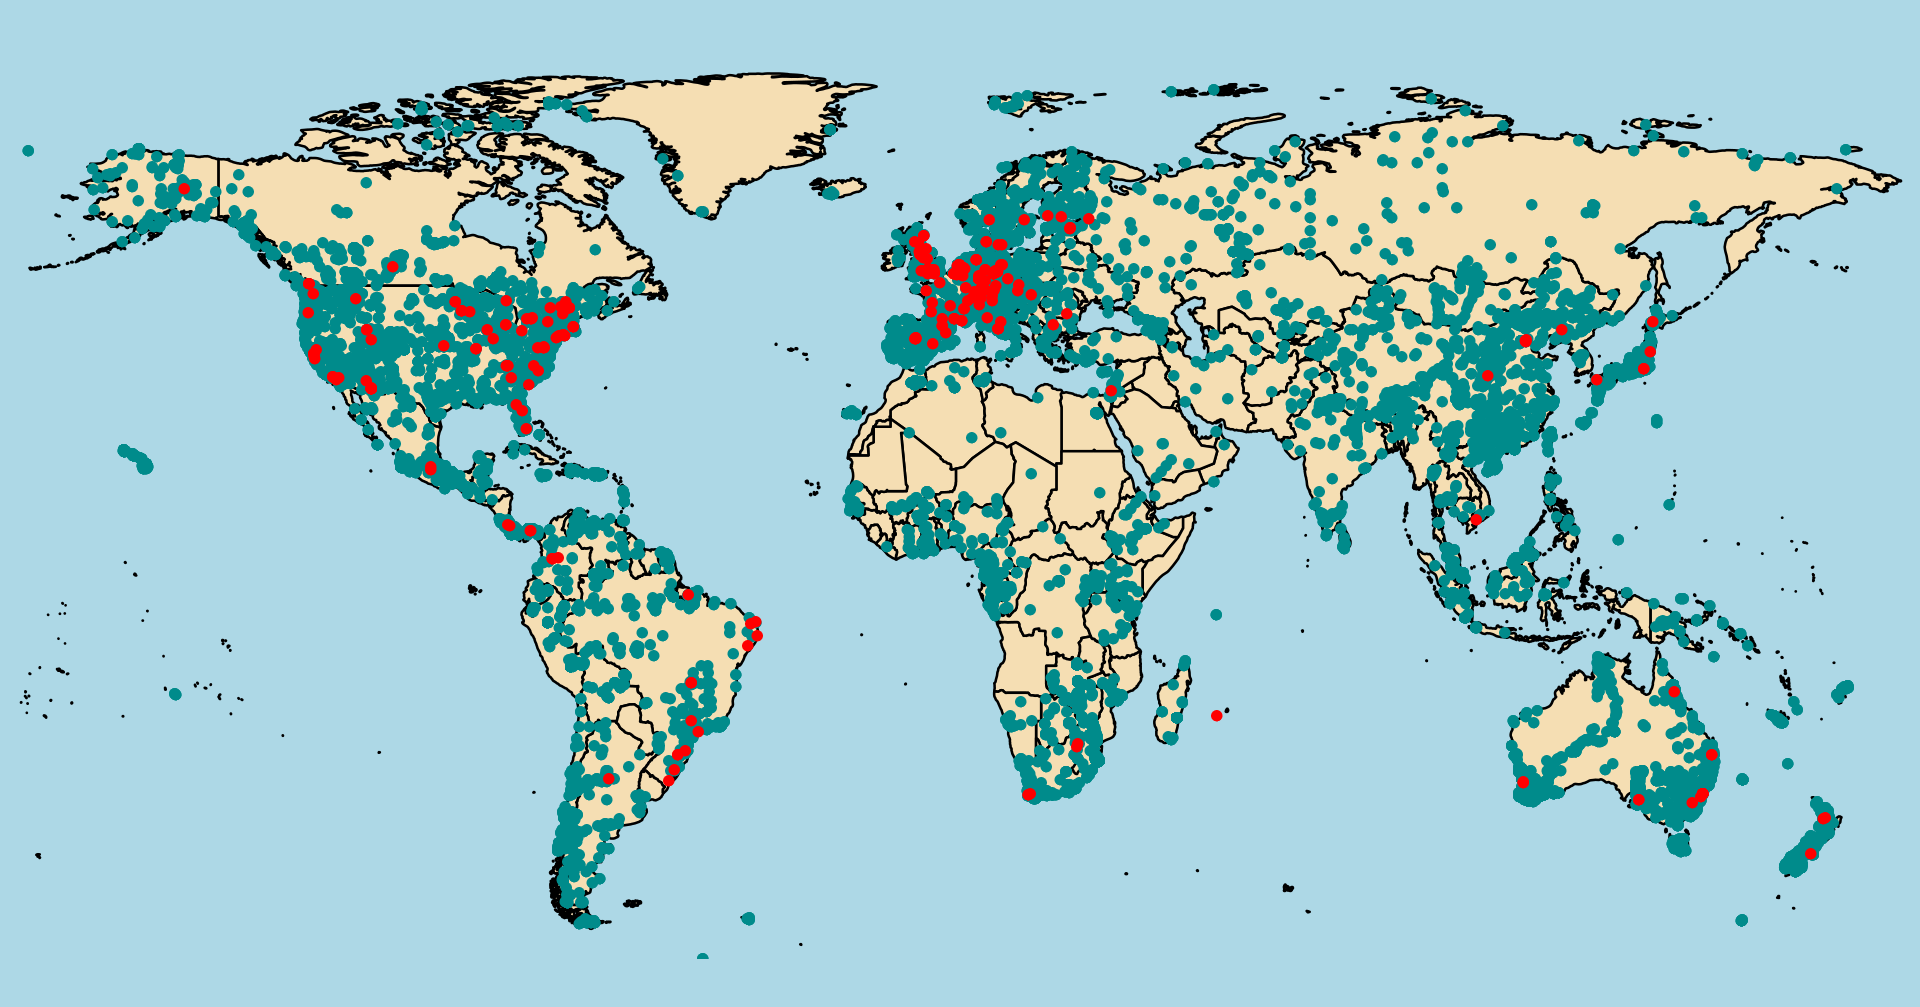 Sites of trait measurements compiled in TRY (blue) and locations of institutes contributing data to TRY (red).